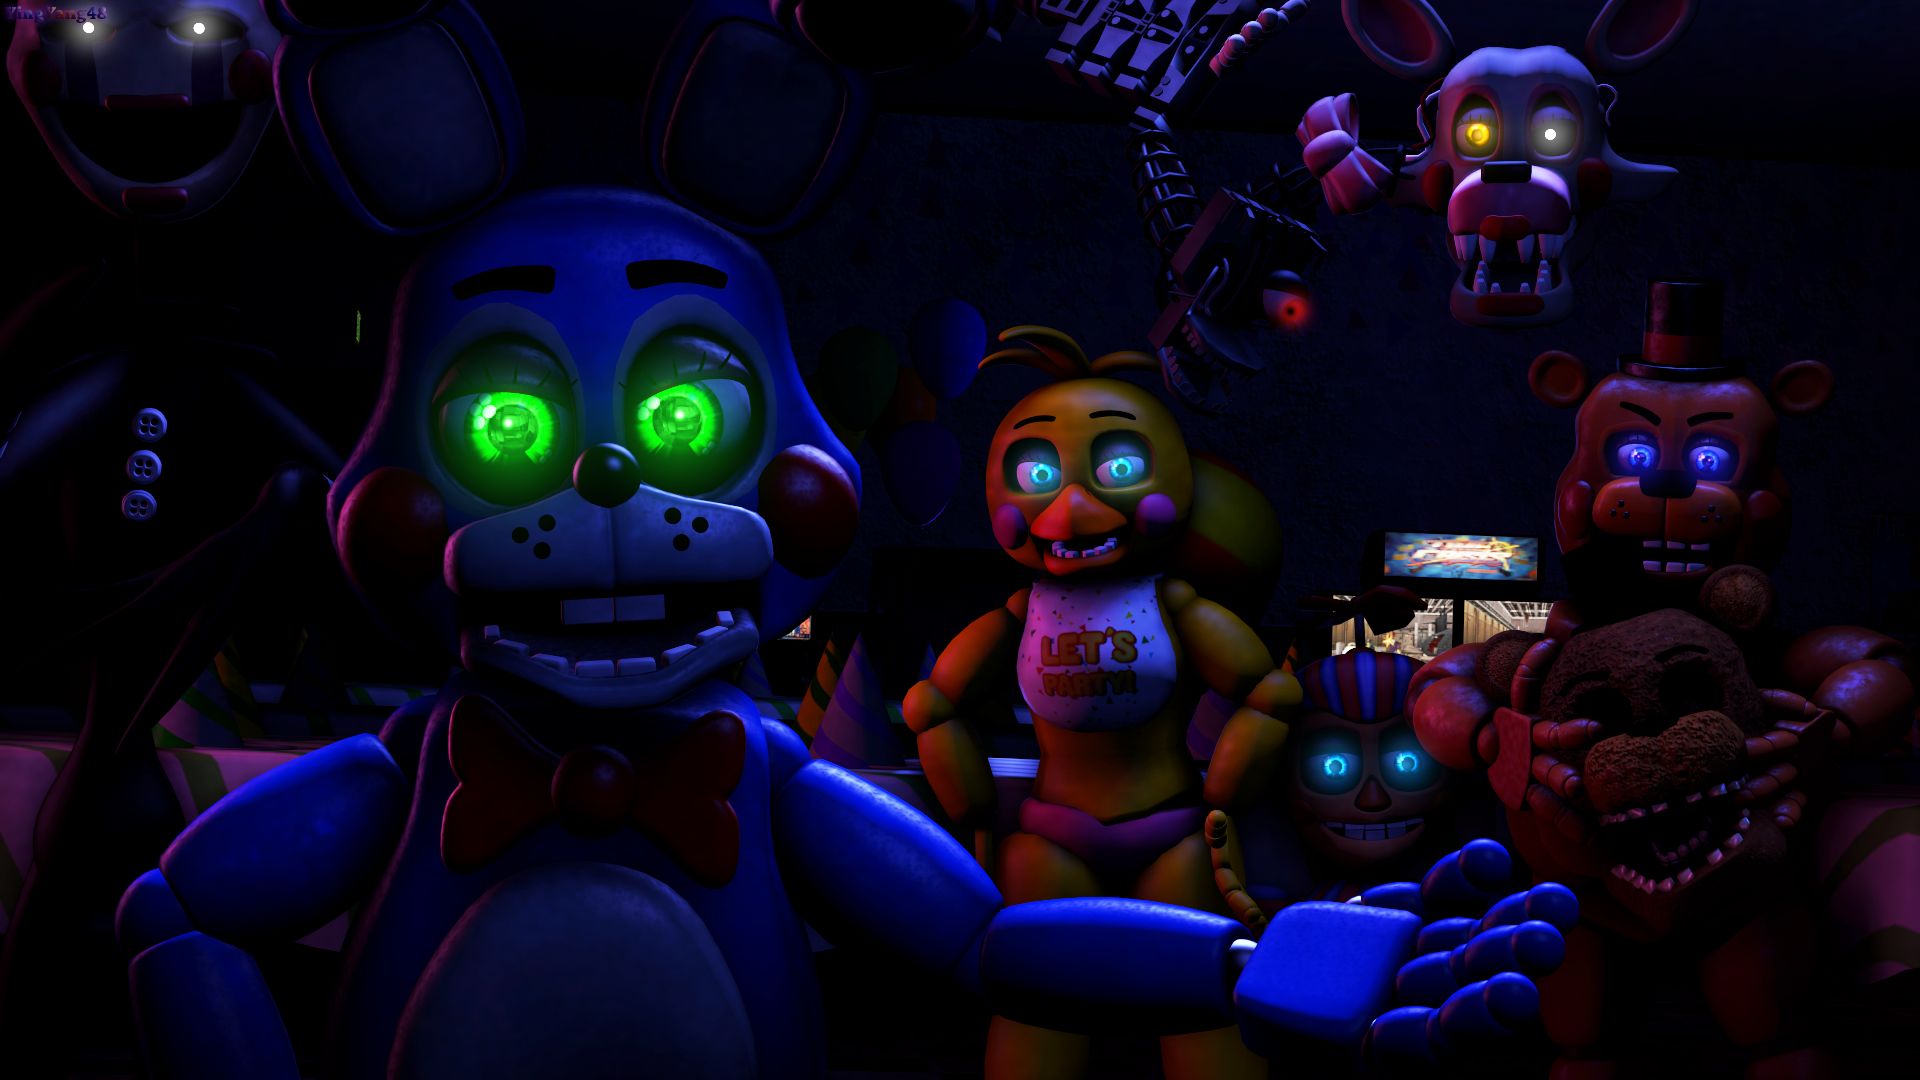 FNAF Wallpapers  Backgrounds Live Maker For Five Nights At Freddys  EDITION iPhone App